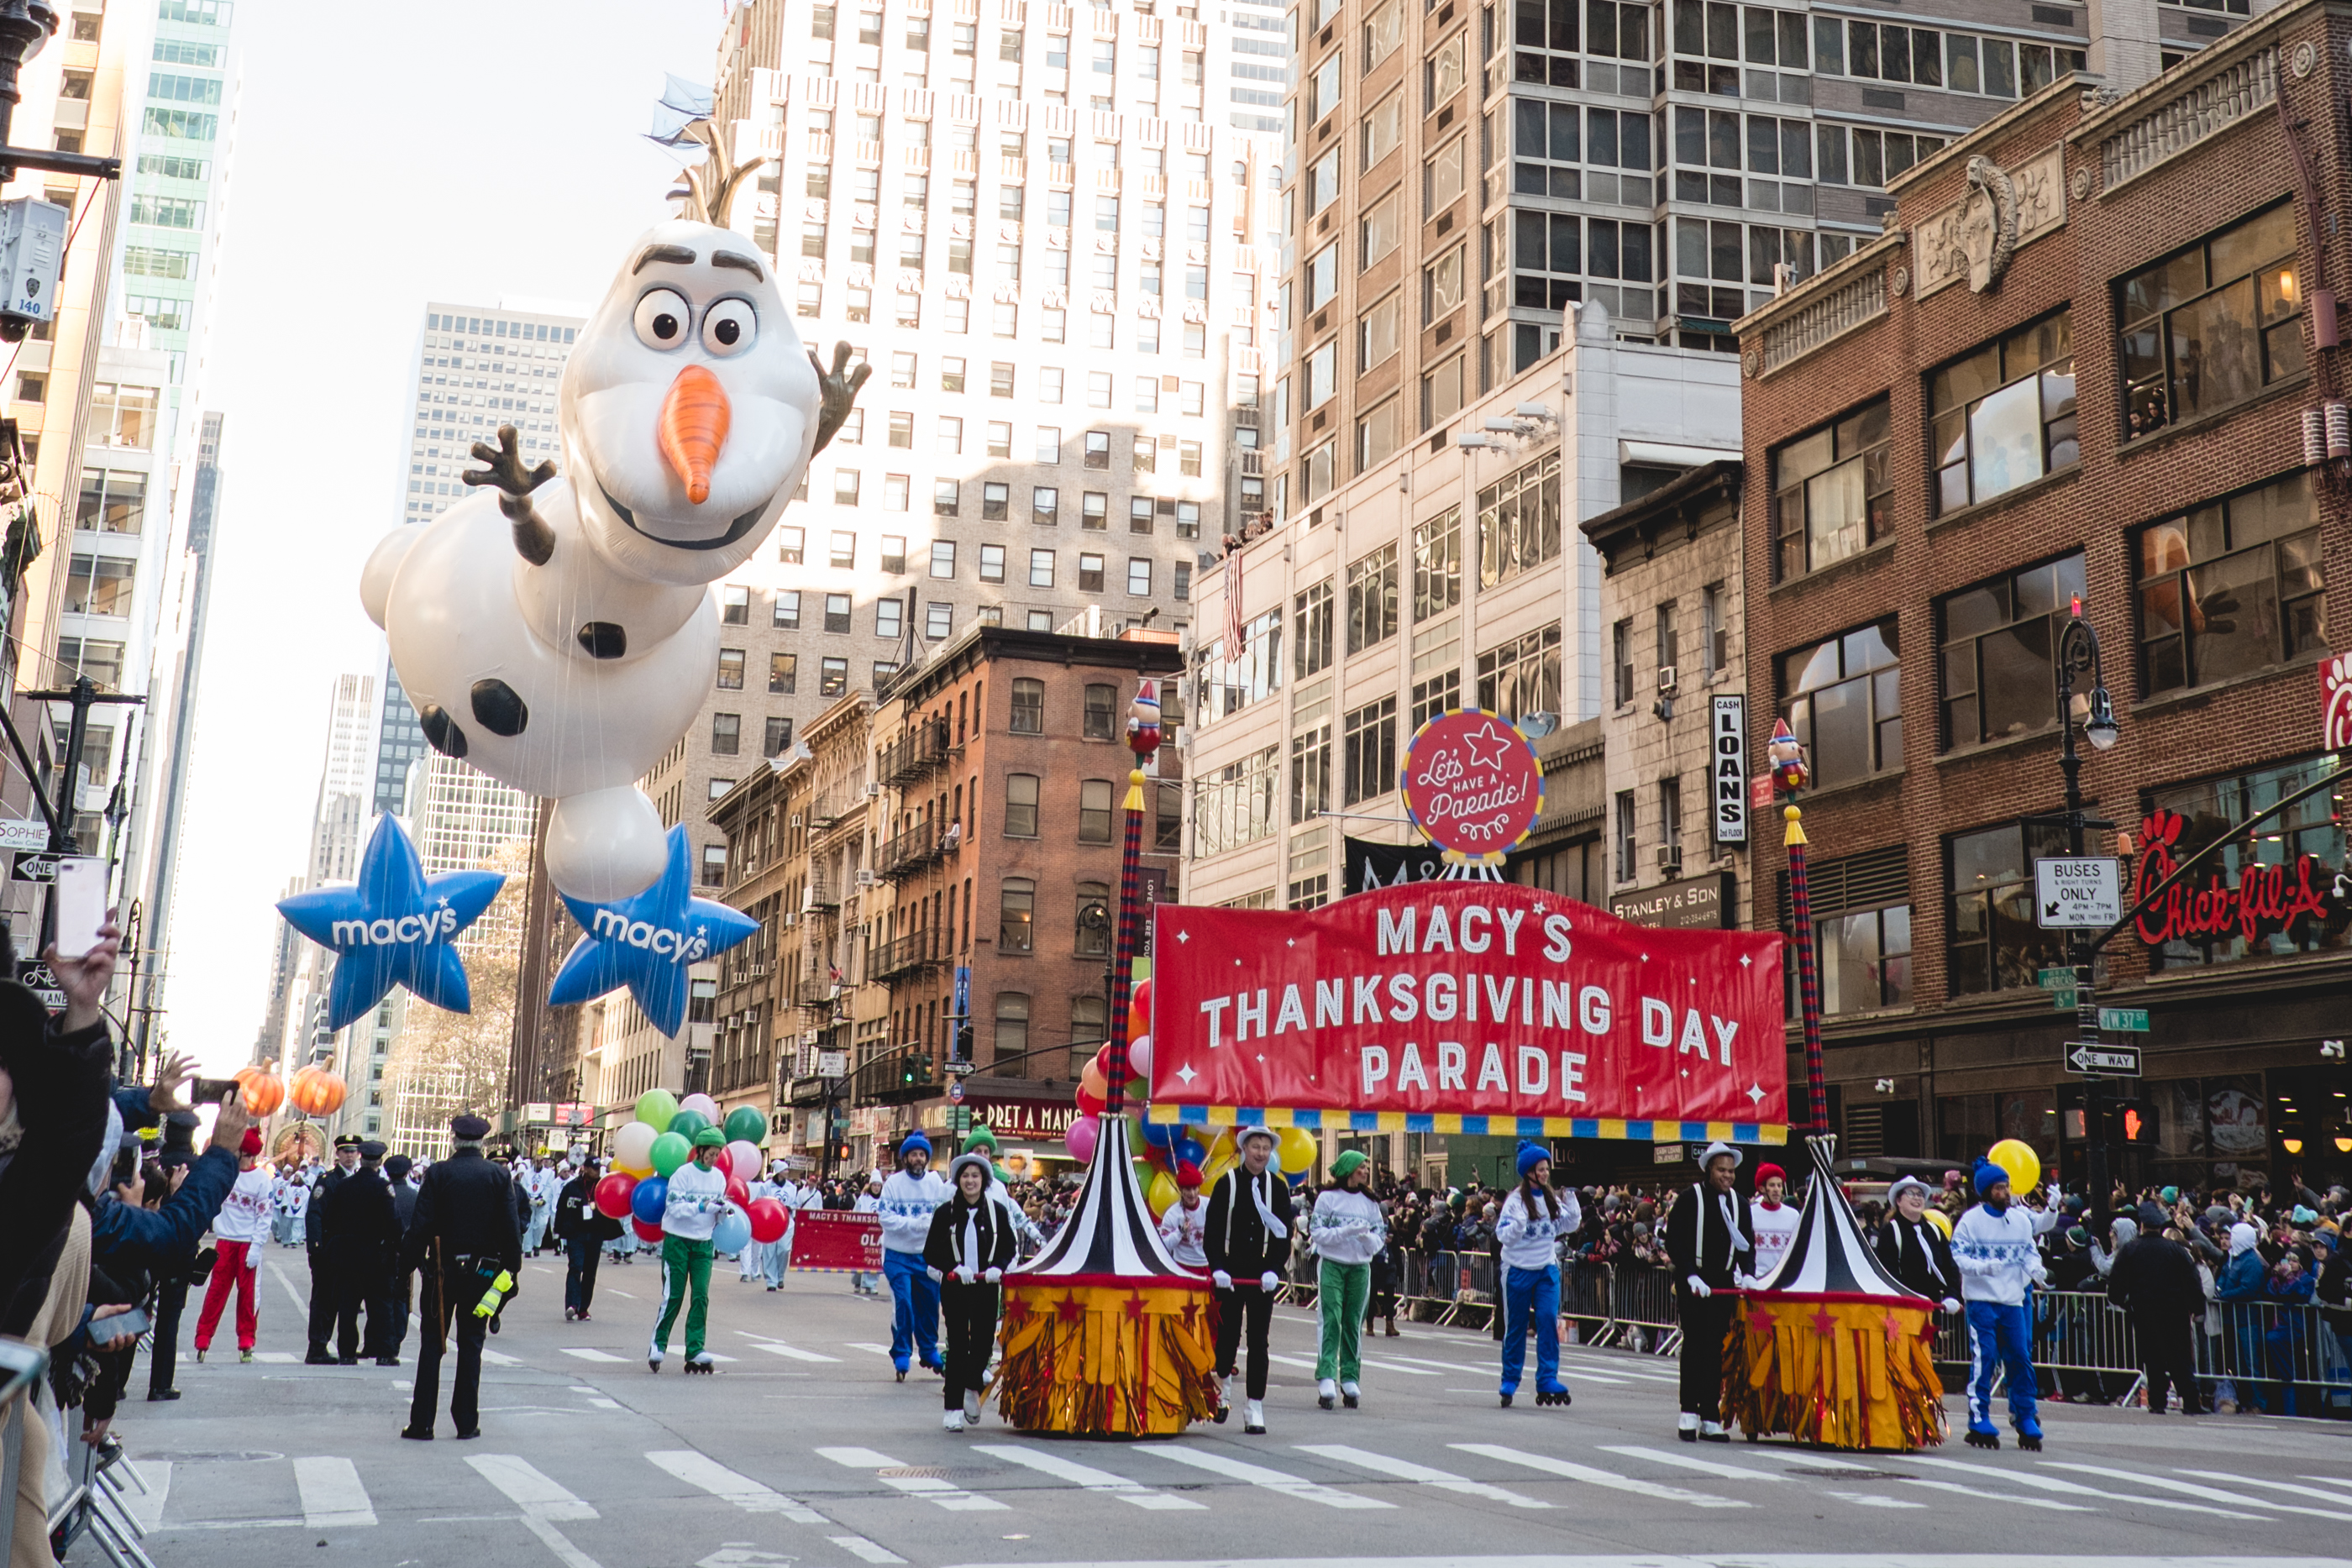 The Macy’s Day Parade A Life Goal Adventure In NYC » Live Lovely